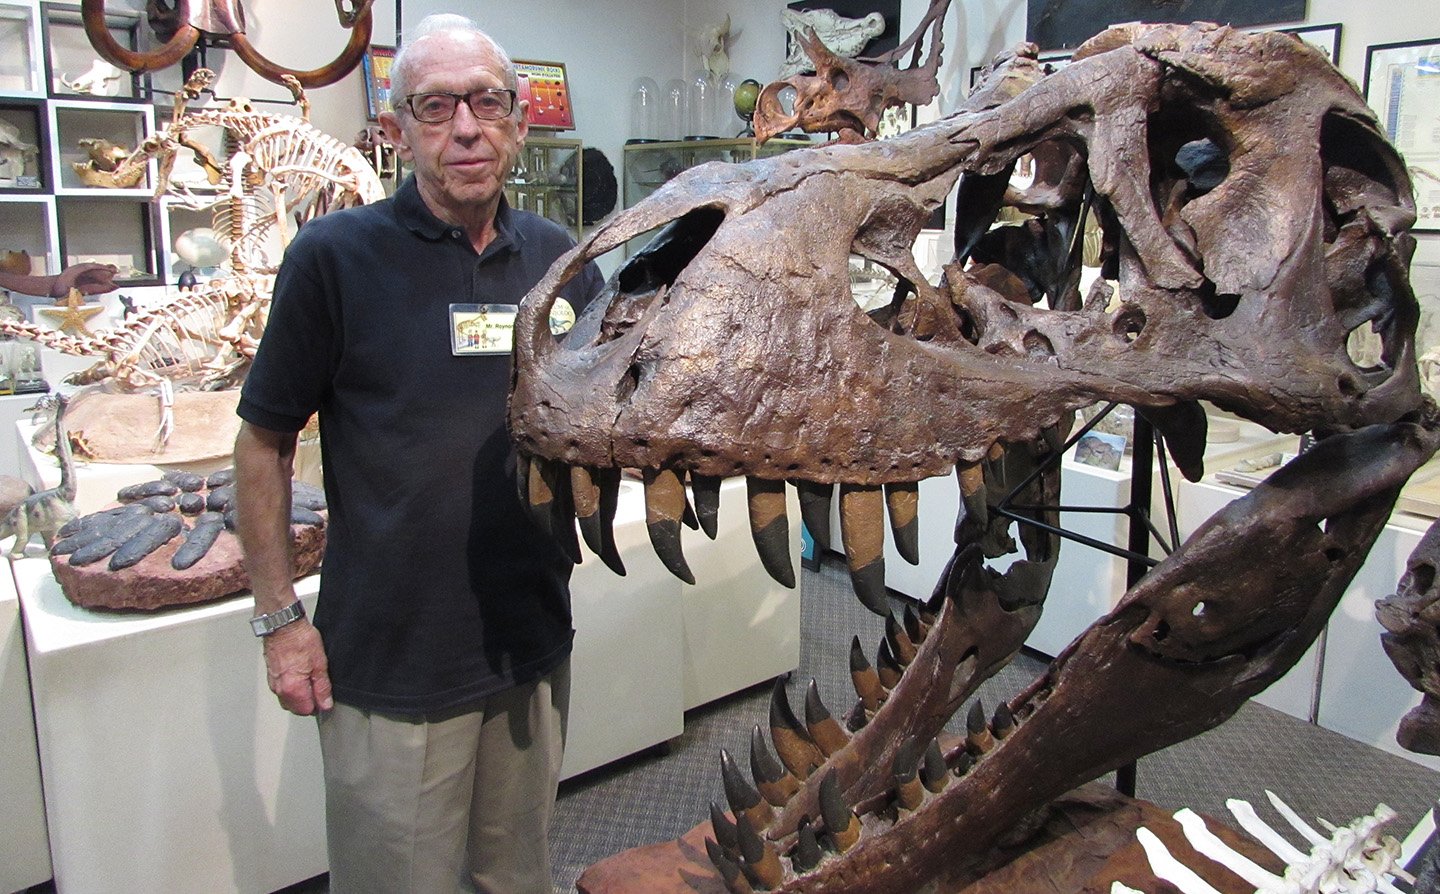 It has taken Keith Roynon 70 years to amass his collection of fossils and dinosaur skeletons. His museum in his home’s garage is in the process of moving to a bigger venue on East Grand Avenue. Photo by Ellen Wright